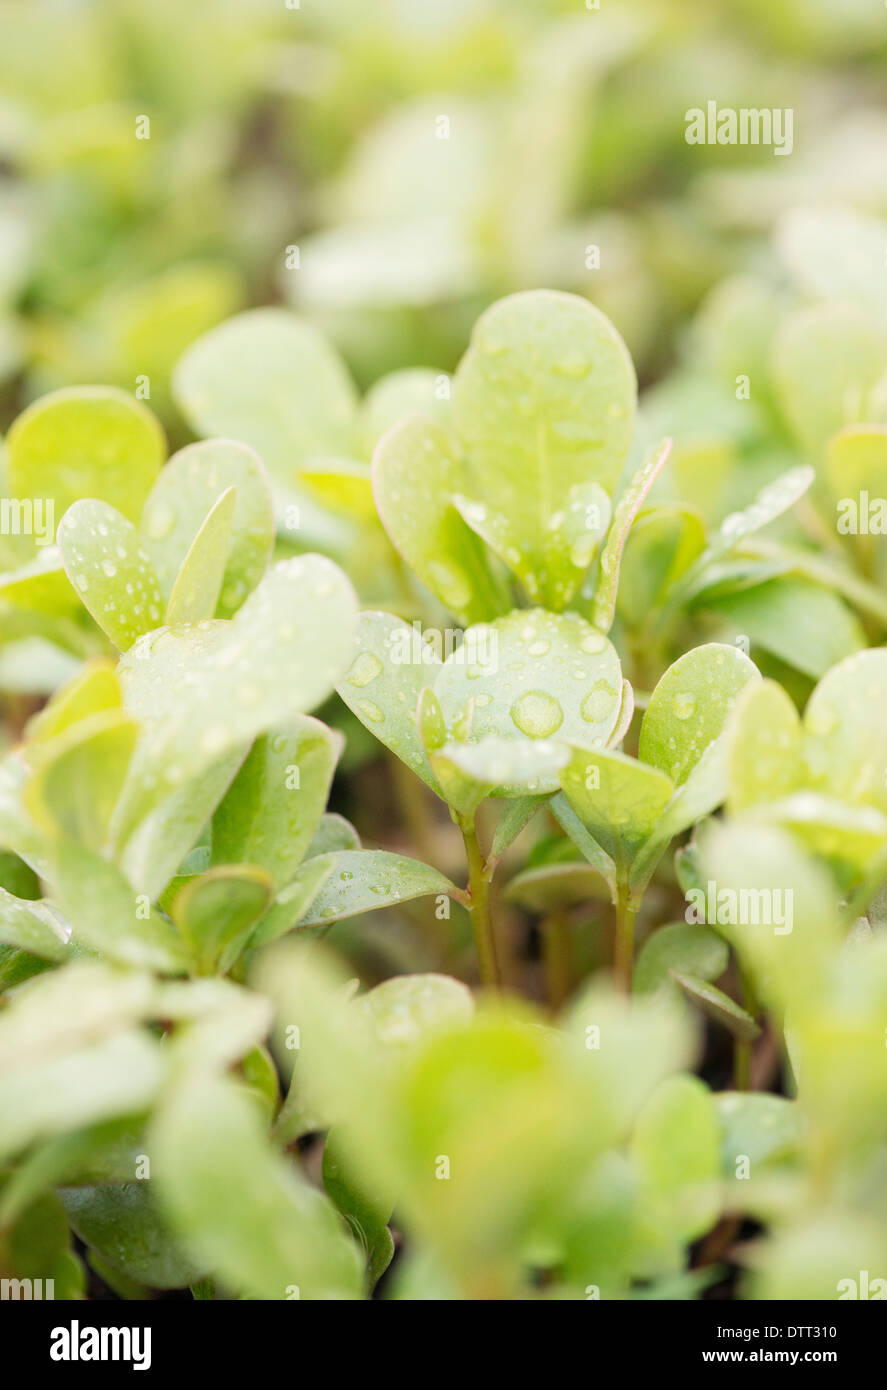 Close up of wet green leaf with droplets of water Stock Photo